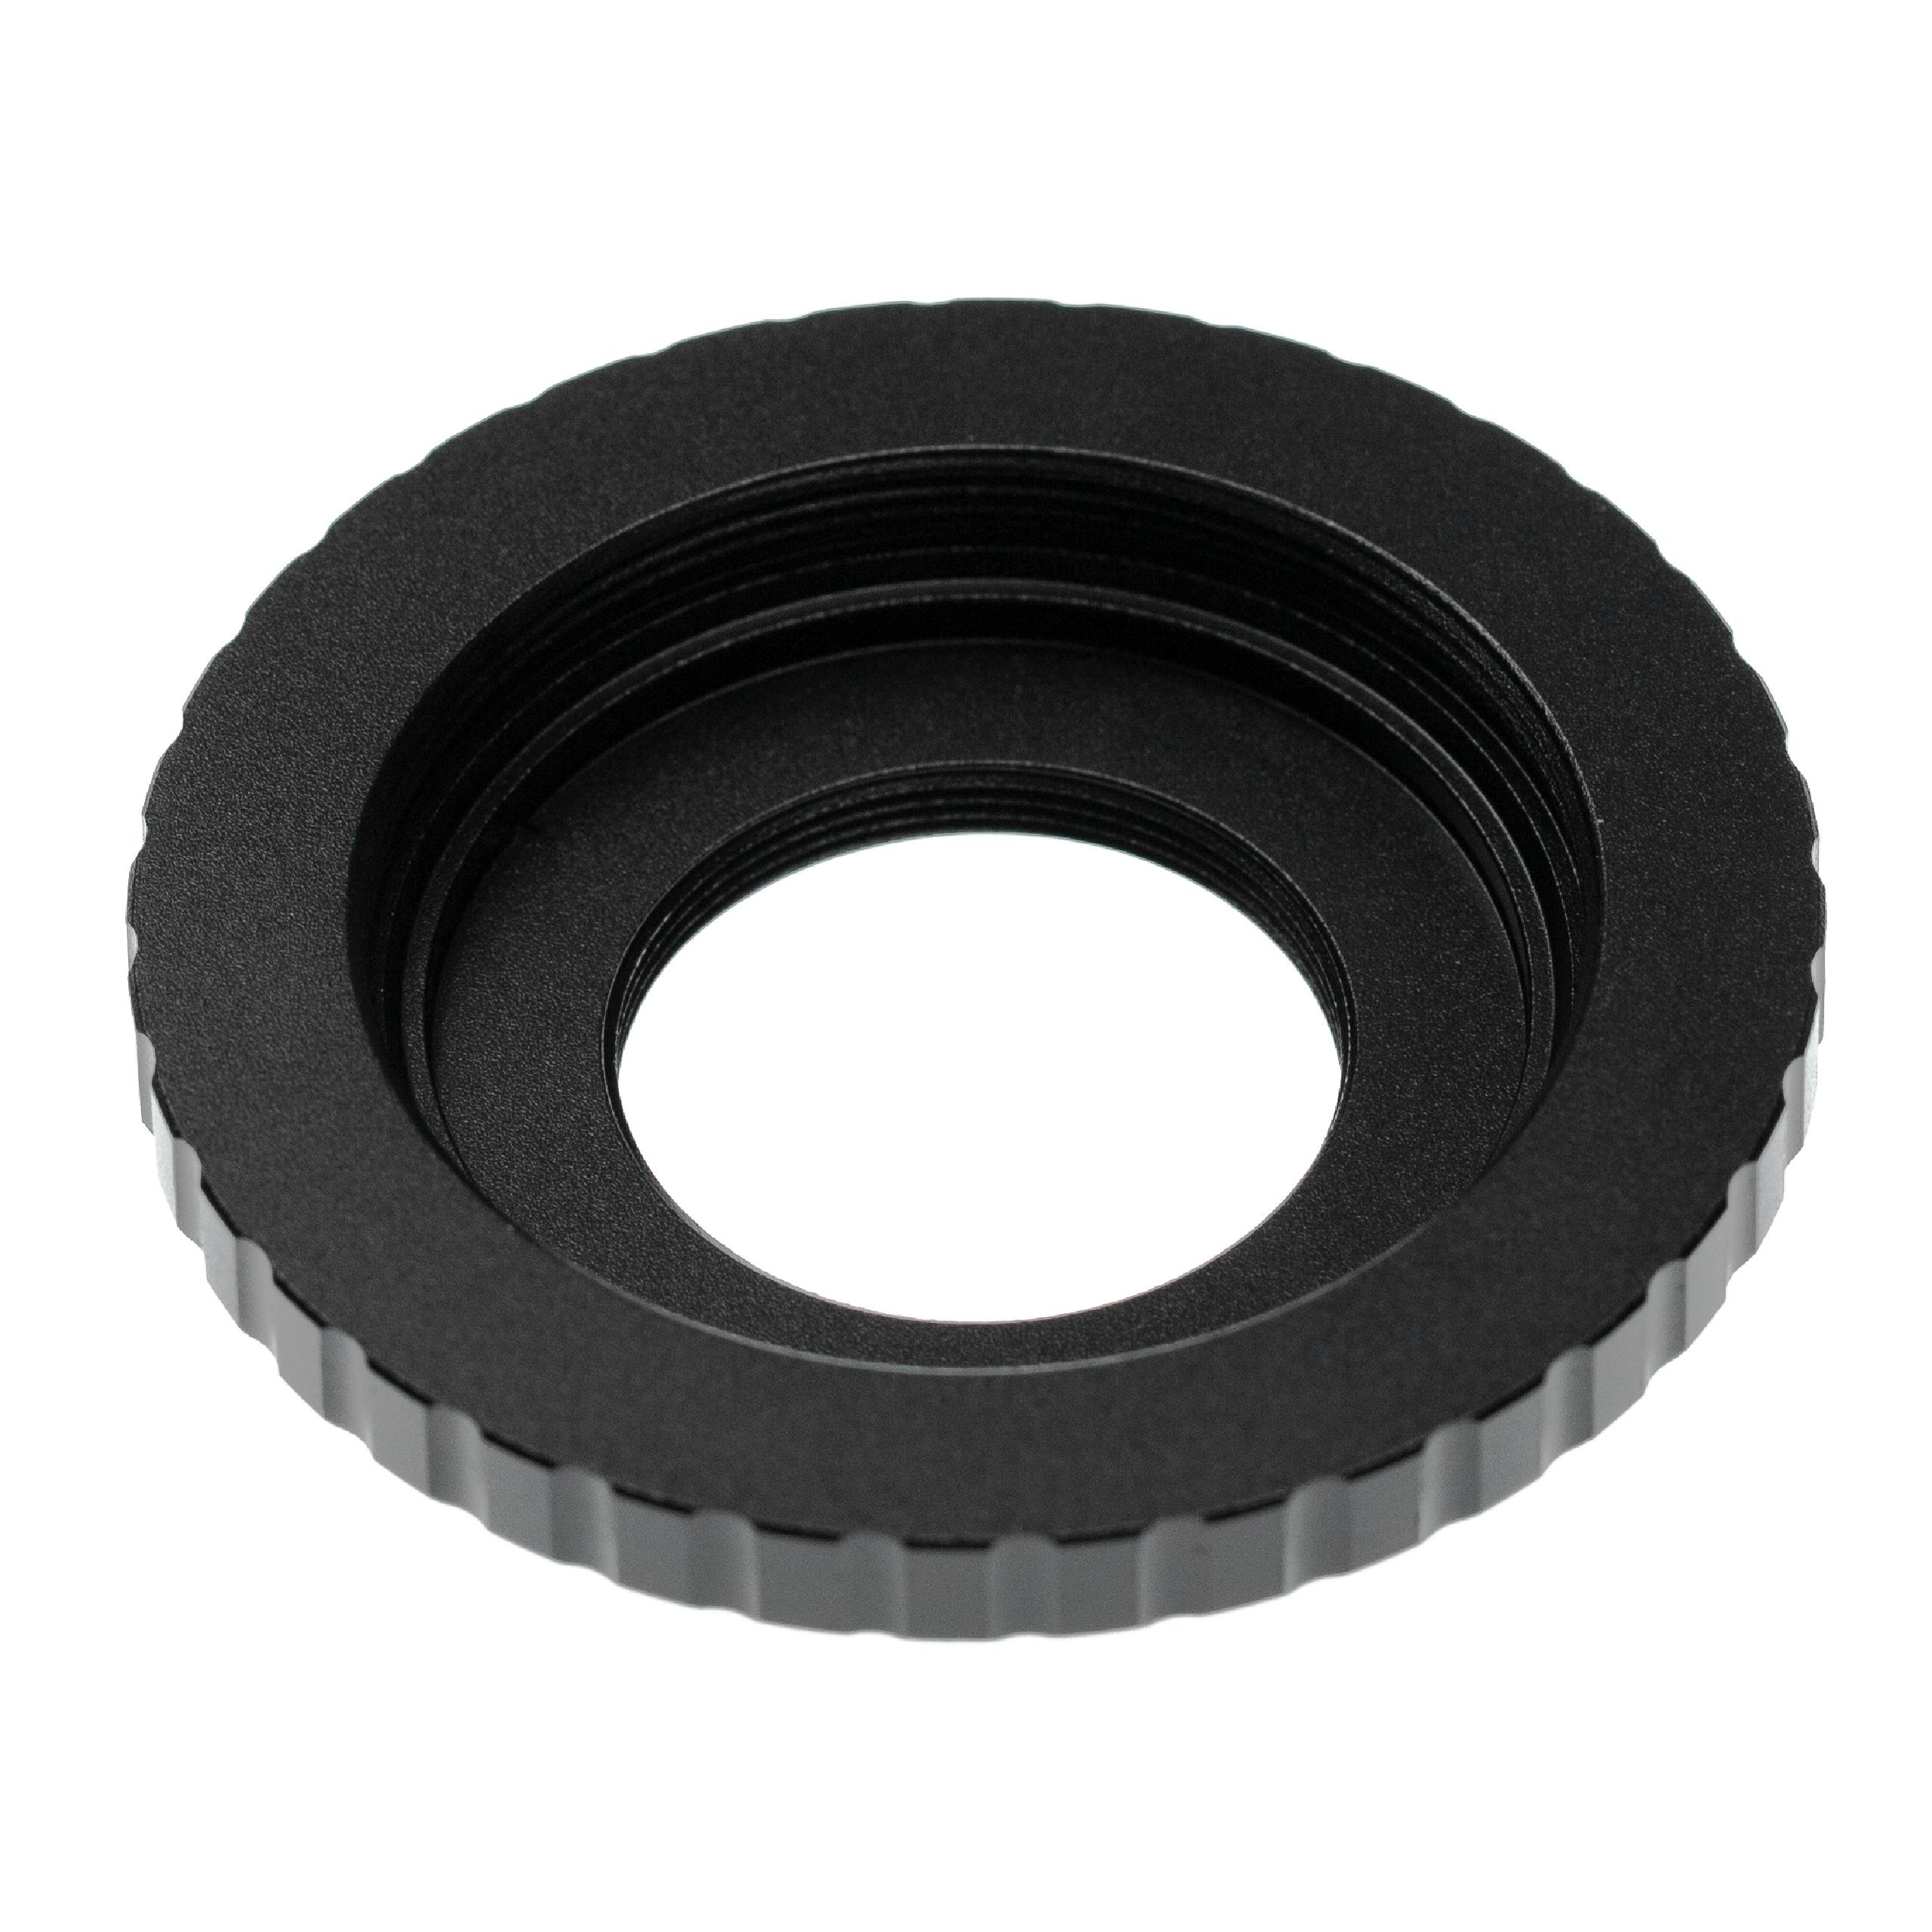 vhbw Adapter Ring compatible with 4/3 Cameras to Lenses with M42 Thread Black